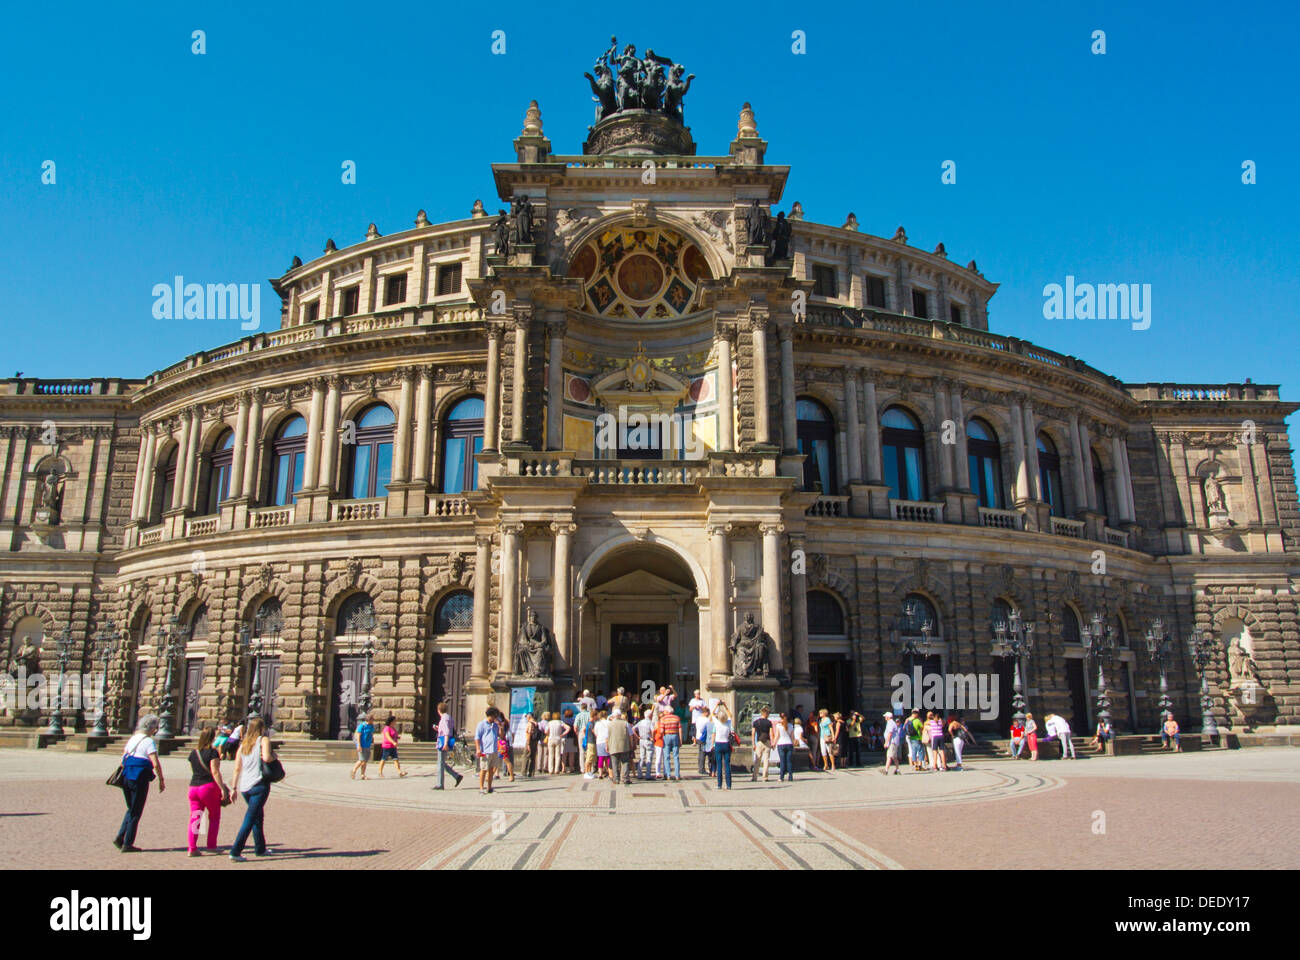 Semperoper opera house at Theaterplatz square Altstadt the old town Dresden city Saxony state eastern Germany central Europe Stock Photo